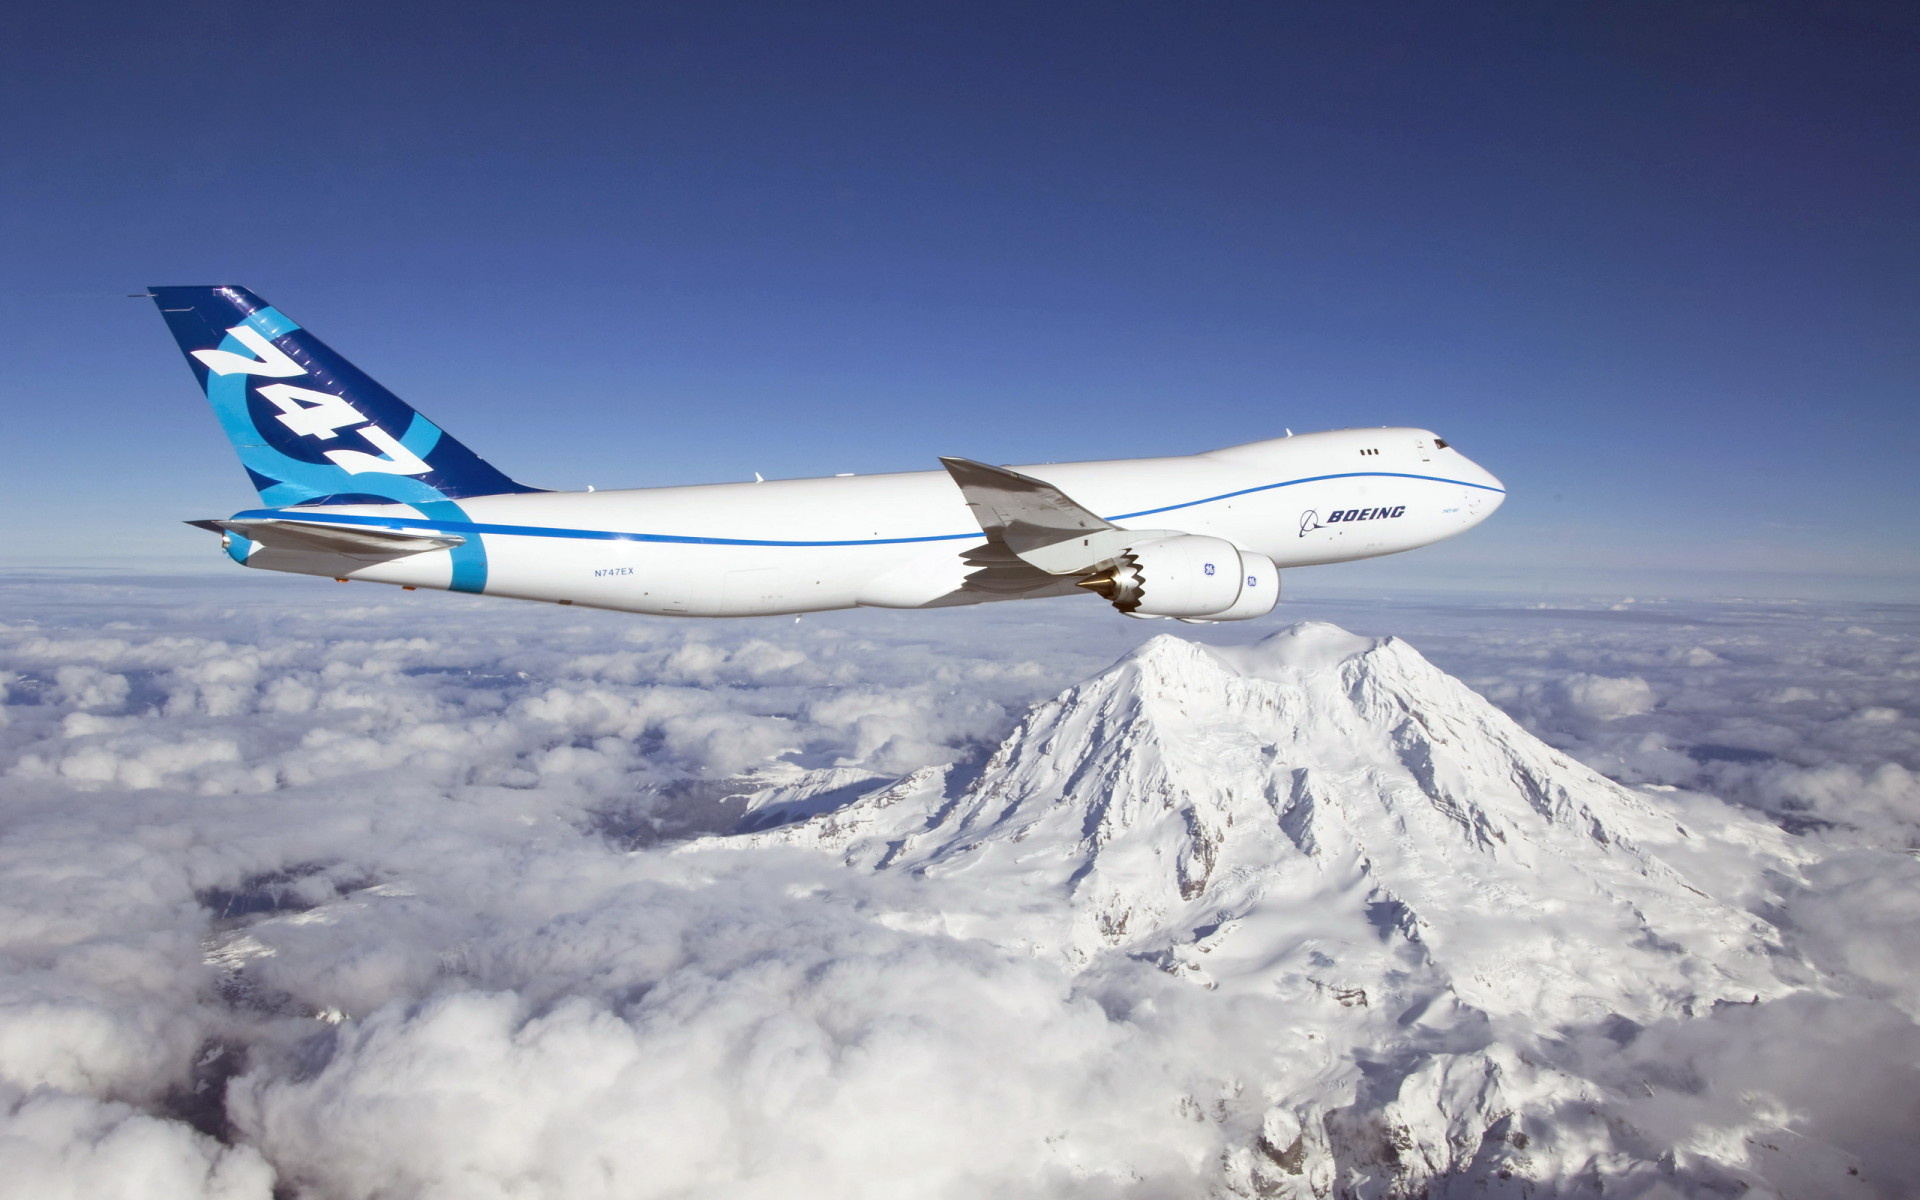 Boeing wallpapers, Include 44 options, collection, Personalize your device, 1920x1200 HD Desktop